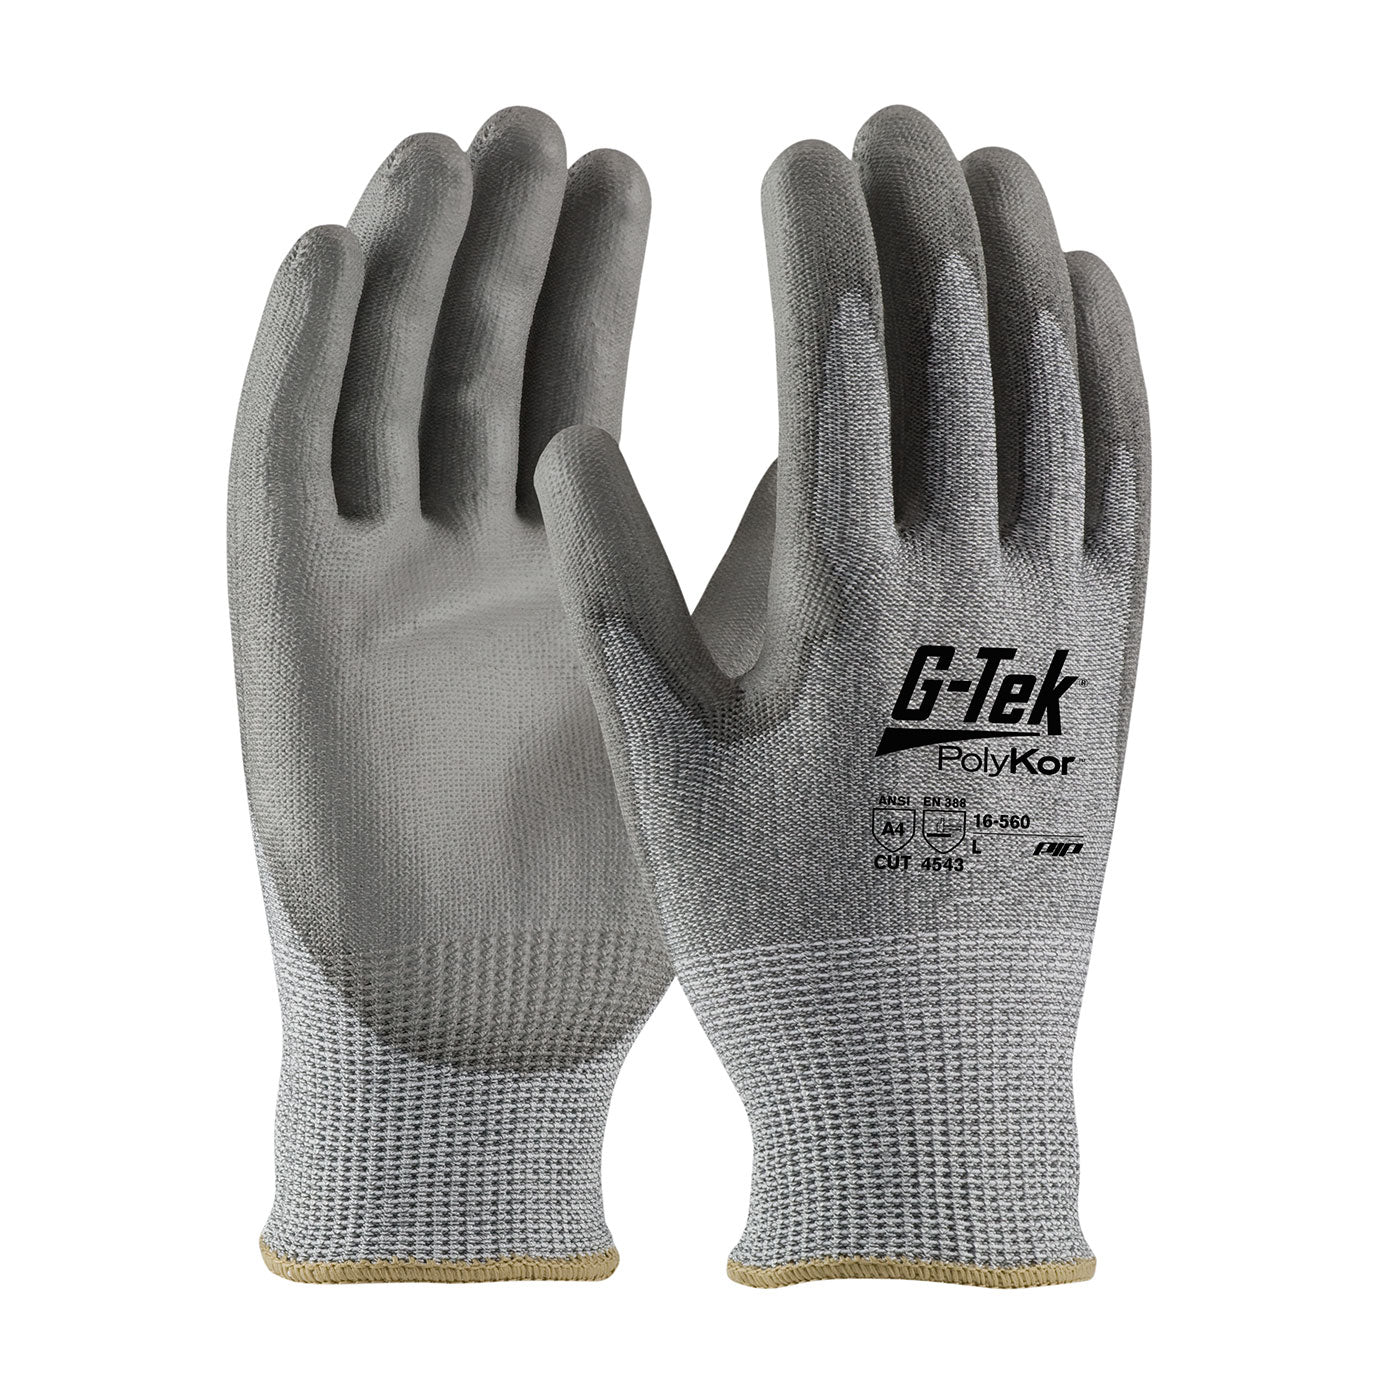 G-Tek Polykor Seamless Knit Blended Glove With Polyurethane Coated Smooth Grip Cut A4-GP16560S